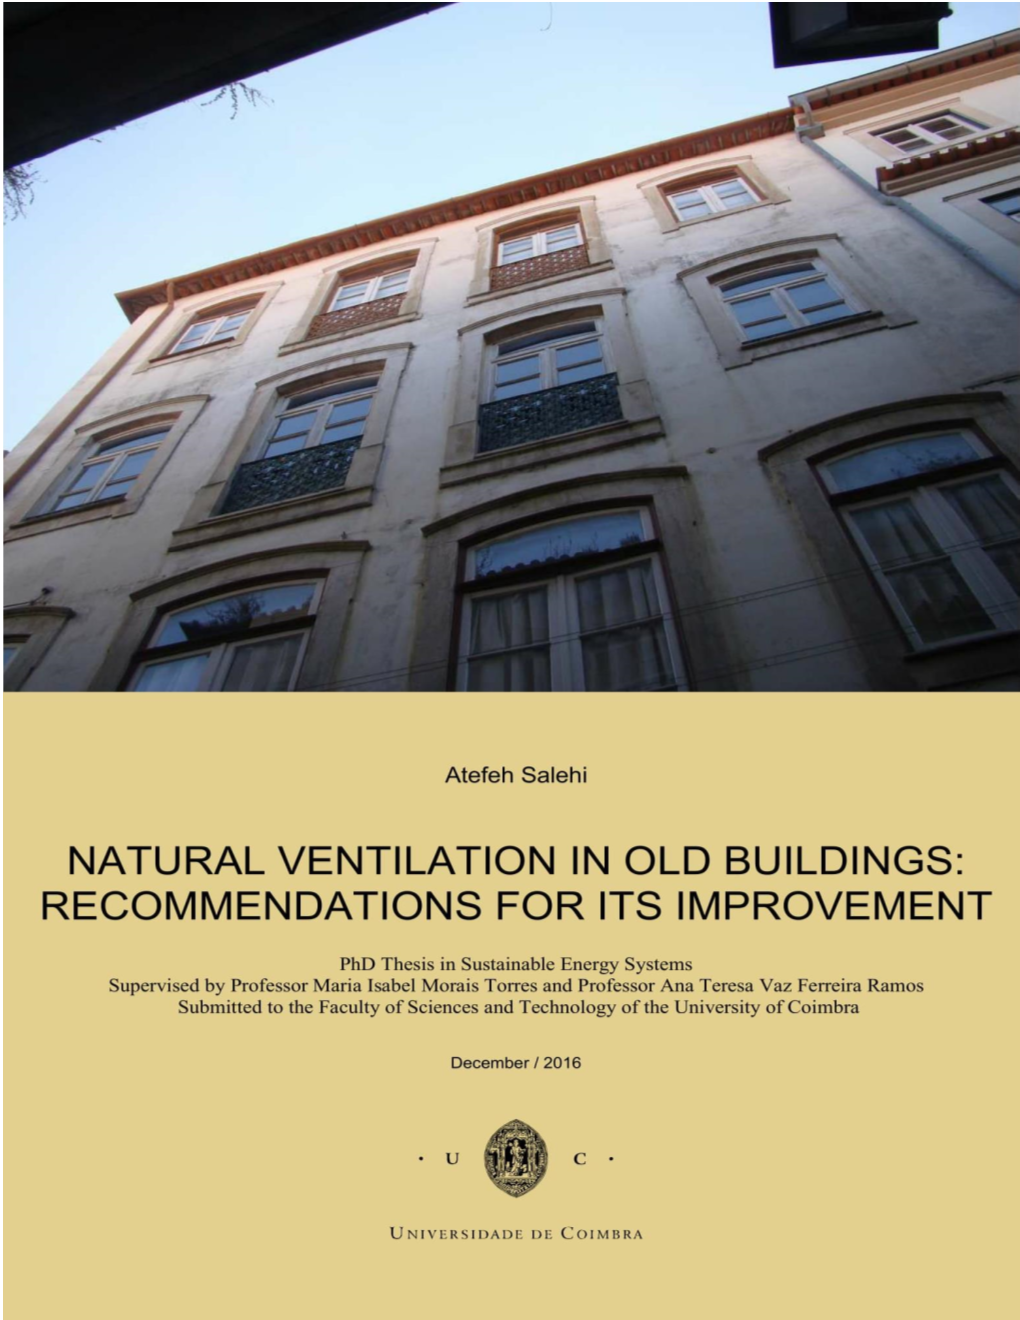 Natural Ventilation in Old Buildings: Recommendations for Its Improvement